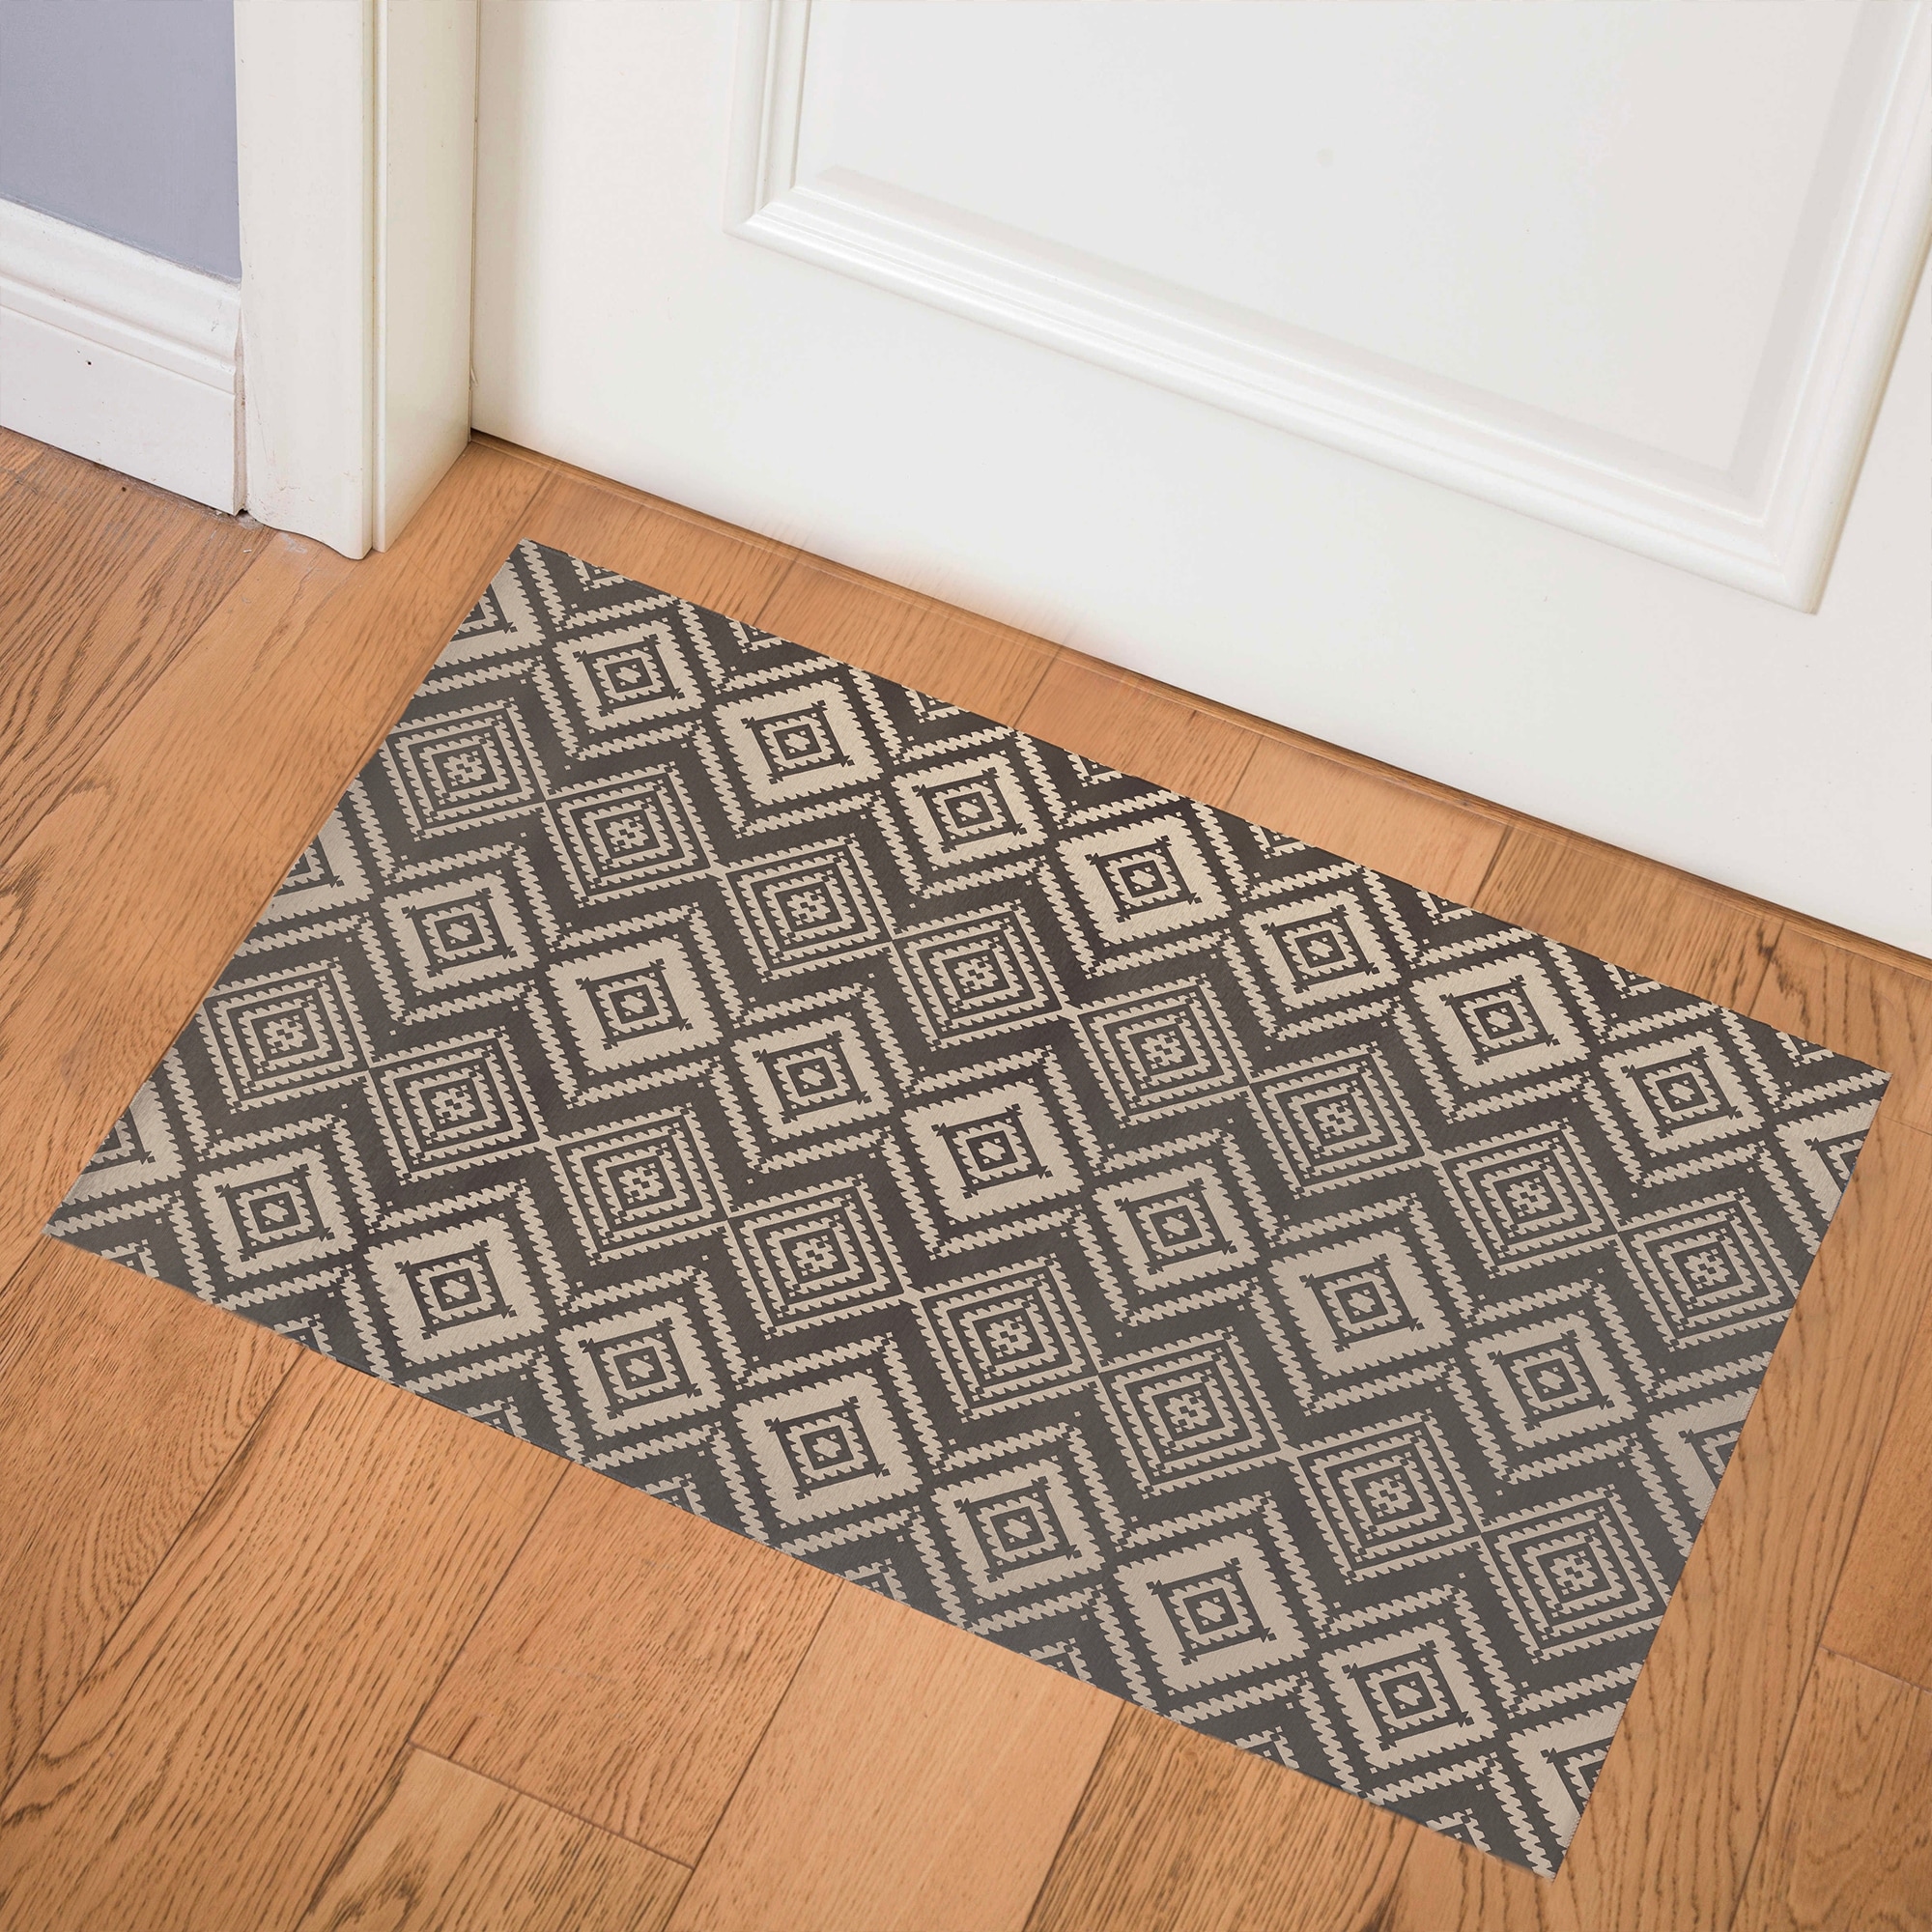 https://ak1.ostkcdn.com/images/products/is/images/direct/bba13e1c7dd518ac7f14419672df43394e4c8caf/MAYA-Indoor-Floor-Mat-By-Kavka-Designs.jpg